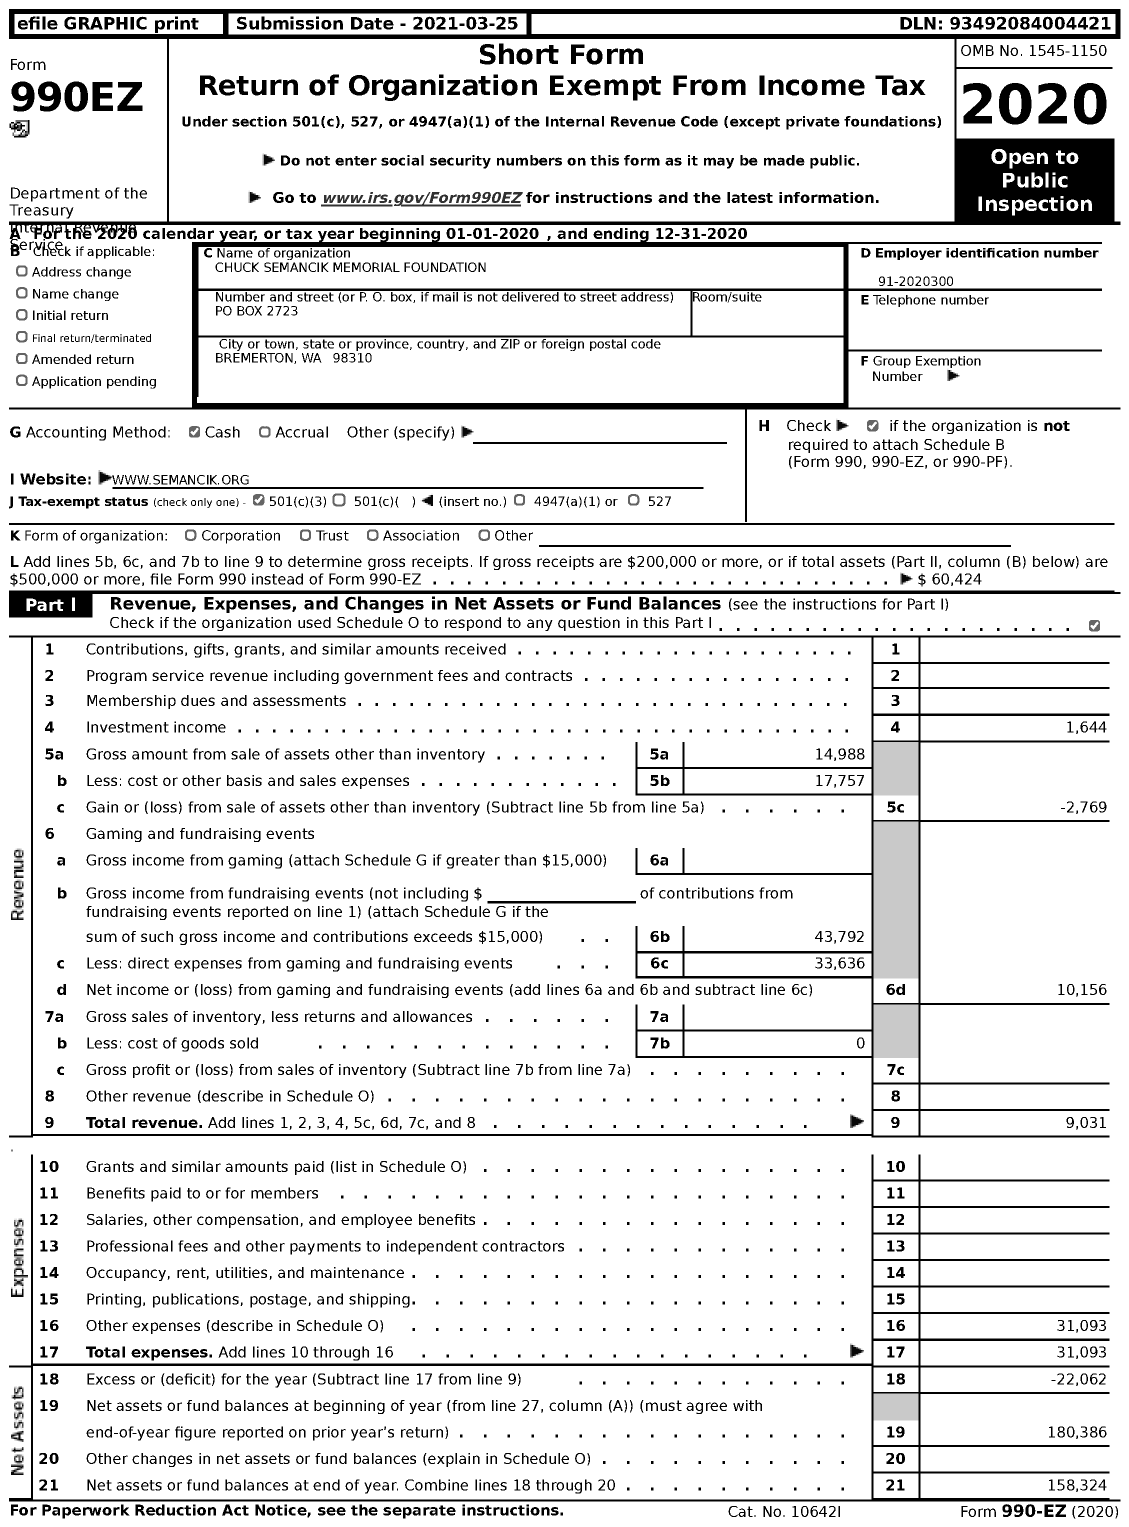 Image of first page of 2020 Form 990EZ for Chuck Semancik Memorial Foundation